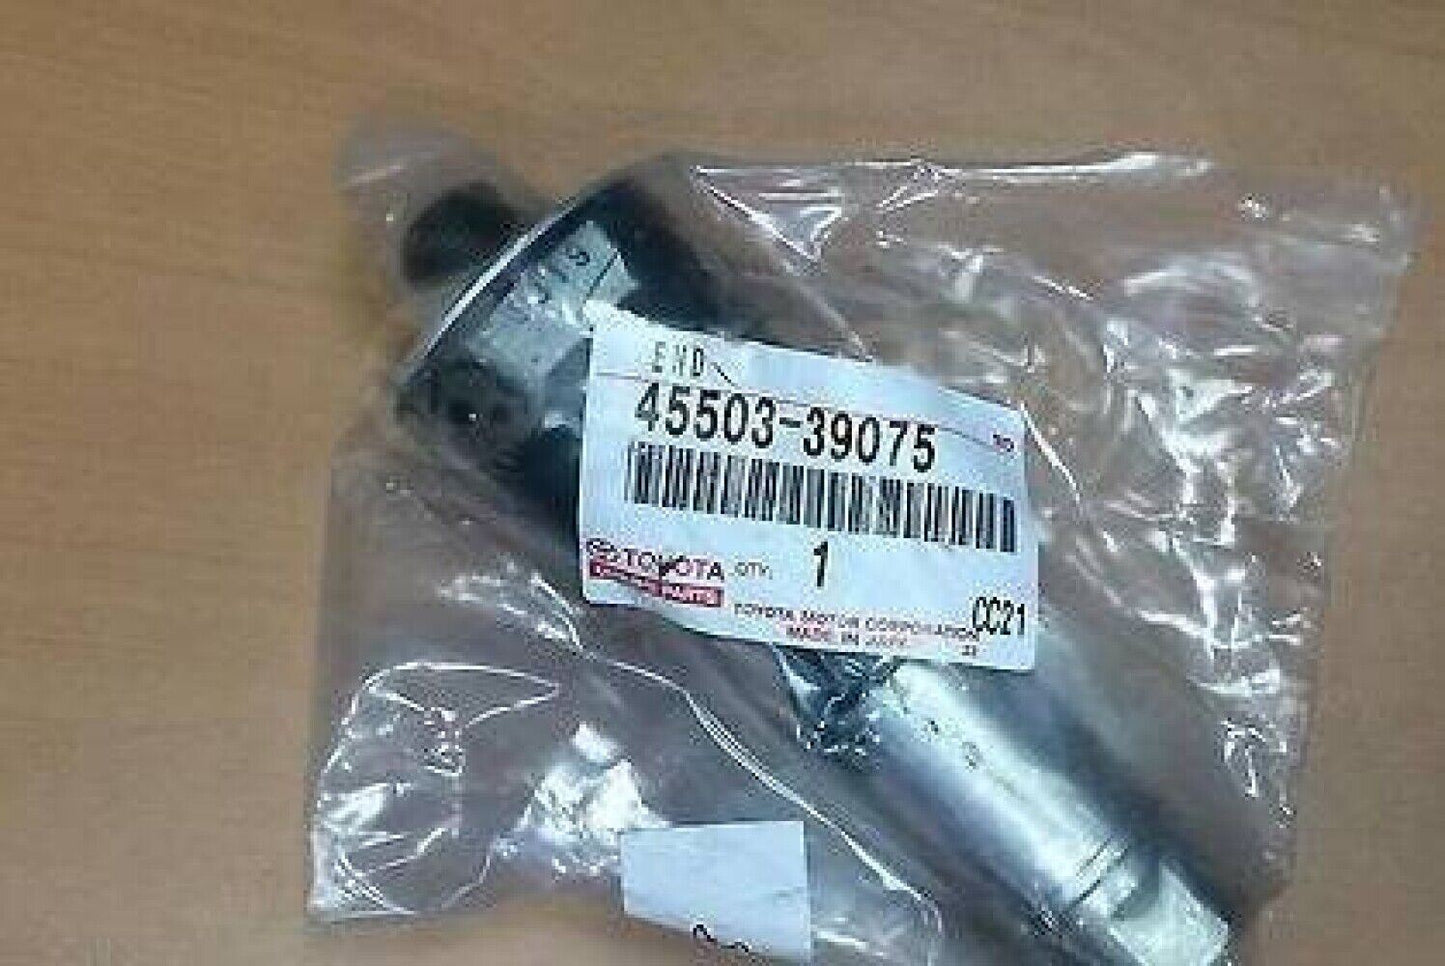 TOYOTA Genuine 4Runner Tacoma 4WD Inner Tie Rod End Assembly 45503-39075